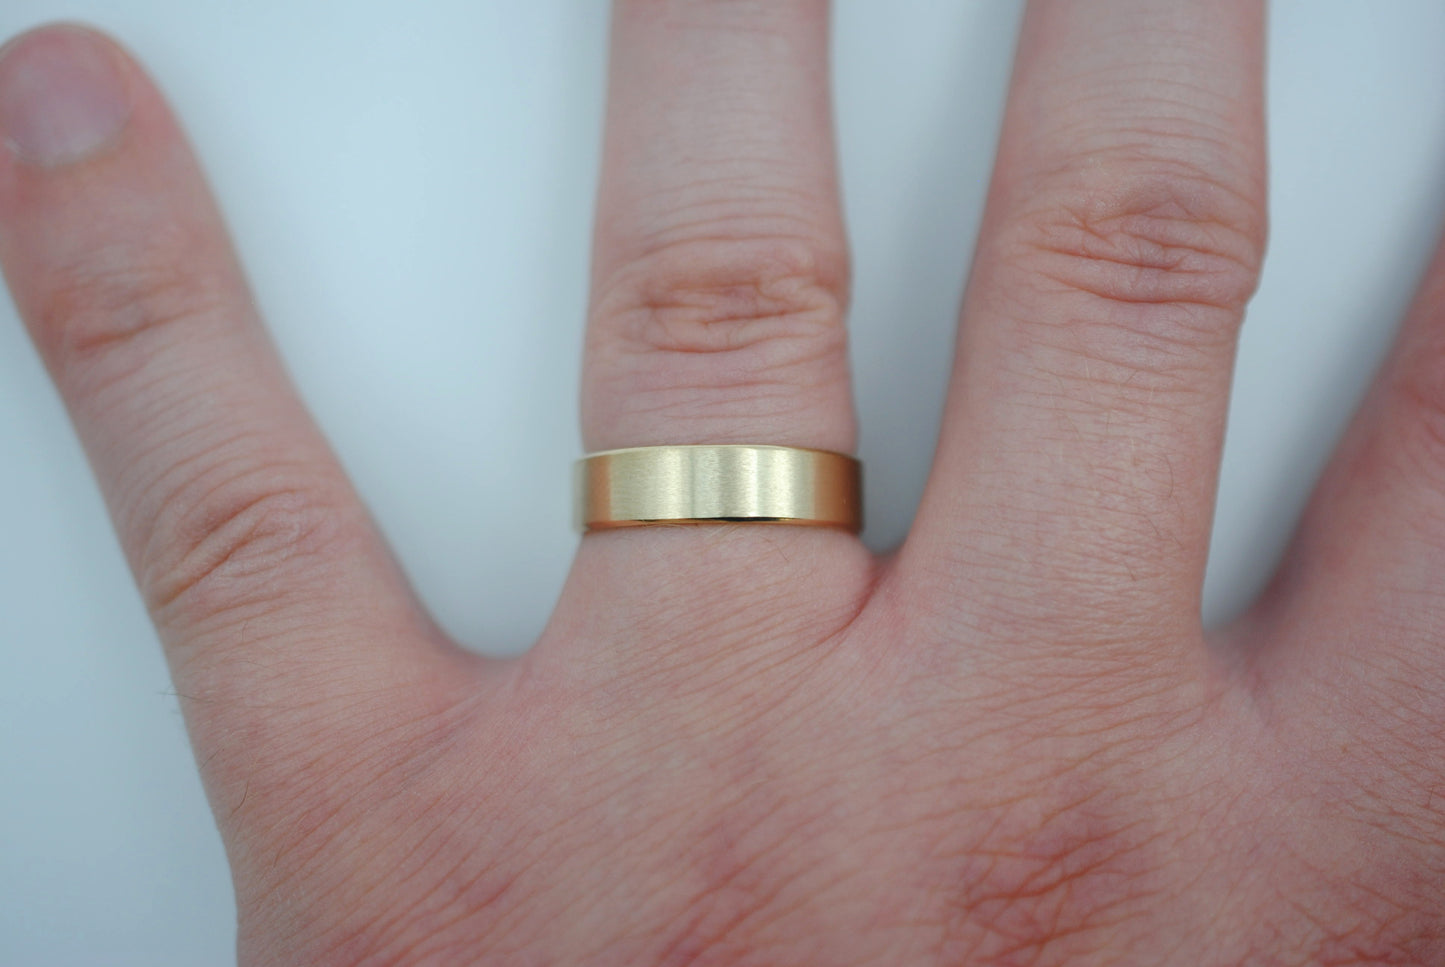 Ring Band: Brushed Texture, Yellow Gold, 5mm Width